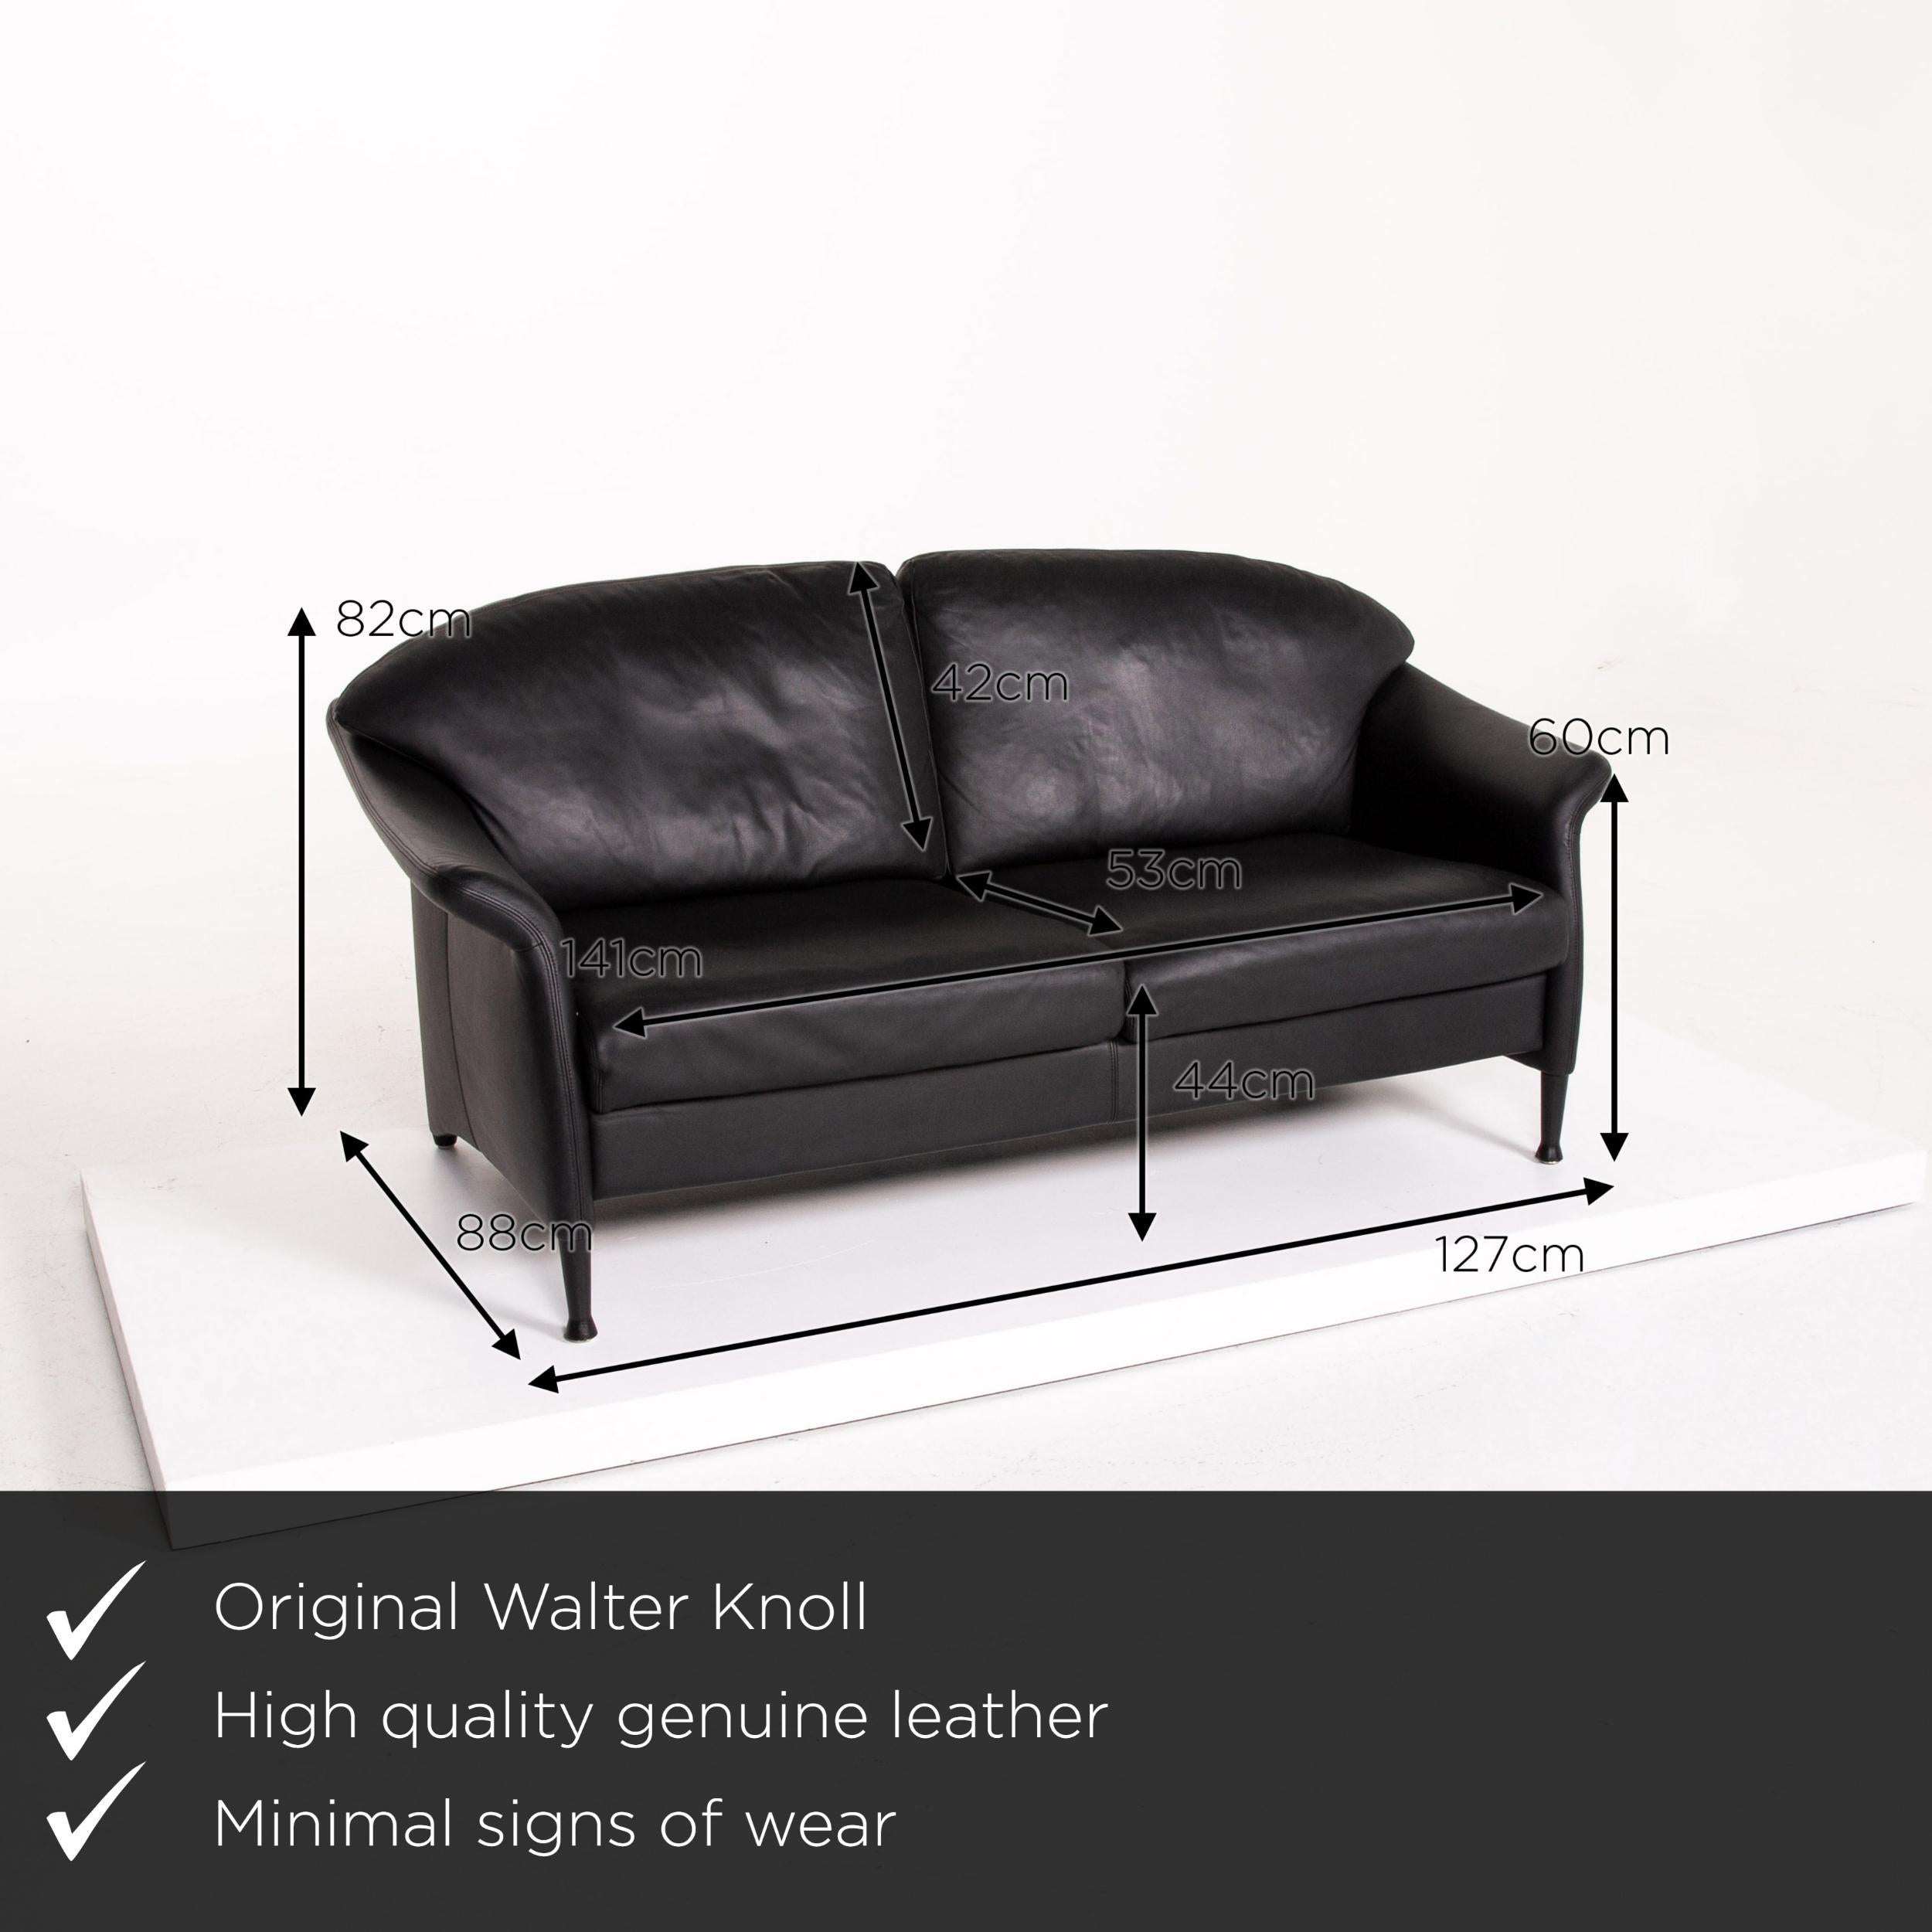 We present to you a Walter Knoll leather sofa black two-seat couch.
 

 Product measurements in centimeters:
 

Depth 88
Width 127
Height 82
Seat height 44
Rest height 60
Seat depth 53
Seat width 141
Back height 42.
 